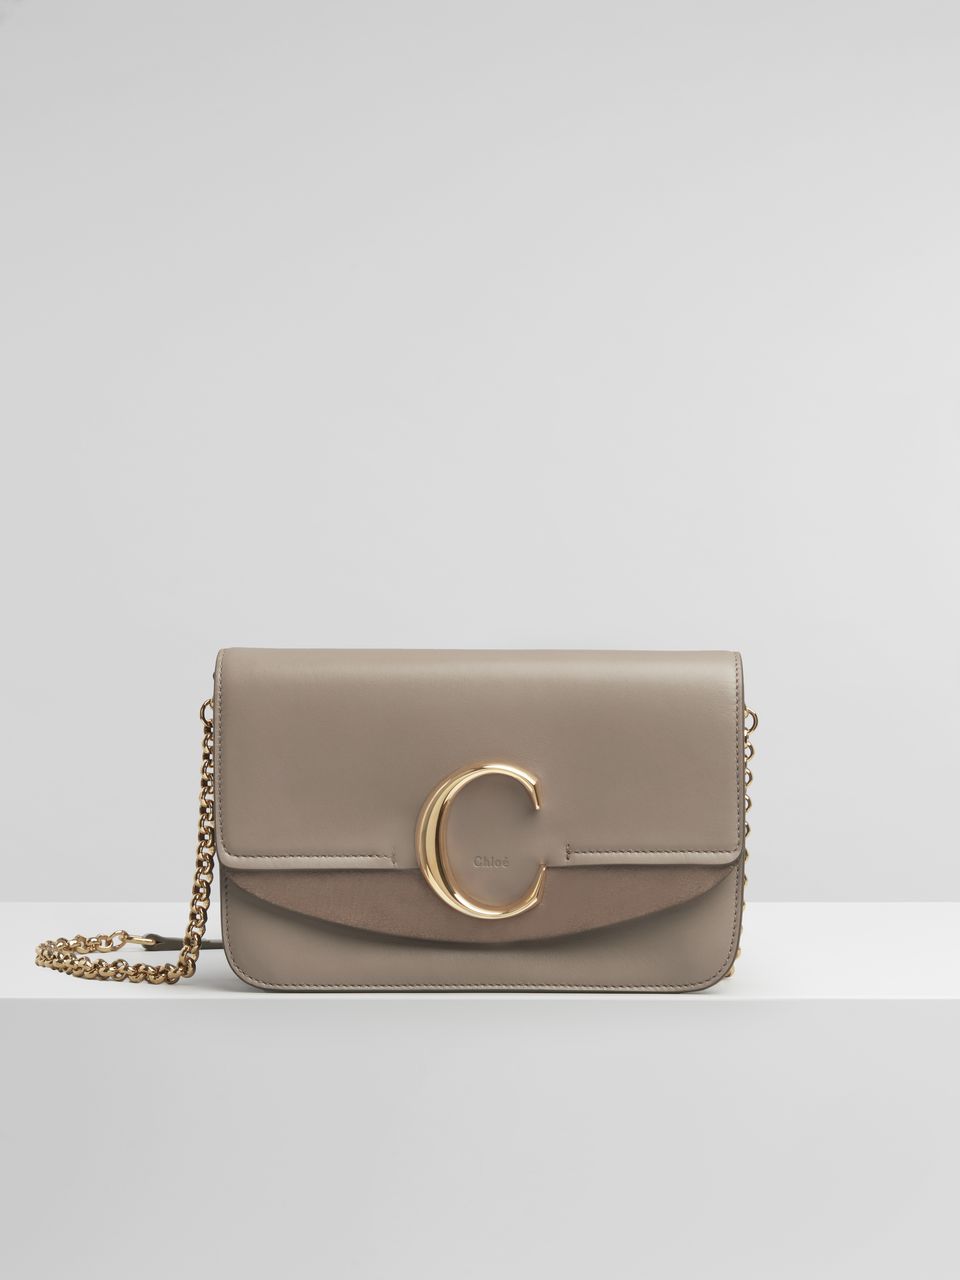 Chloe Spring/Summer 2019 Bag Collection Features The C Bag 